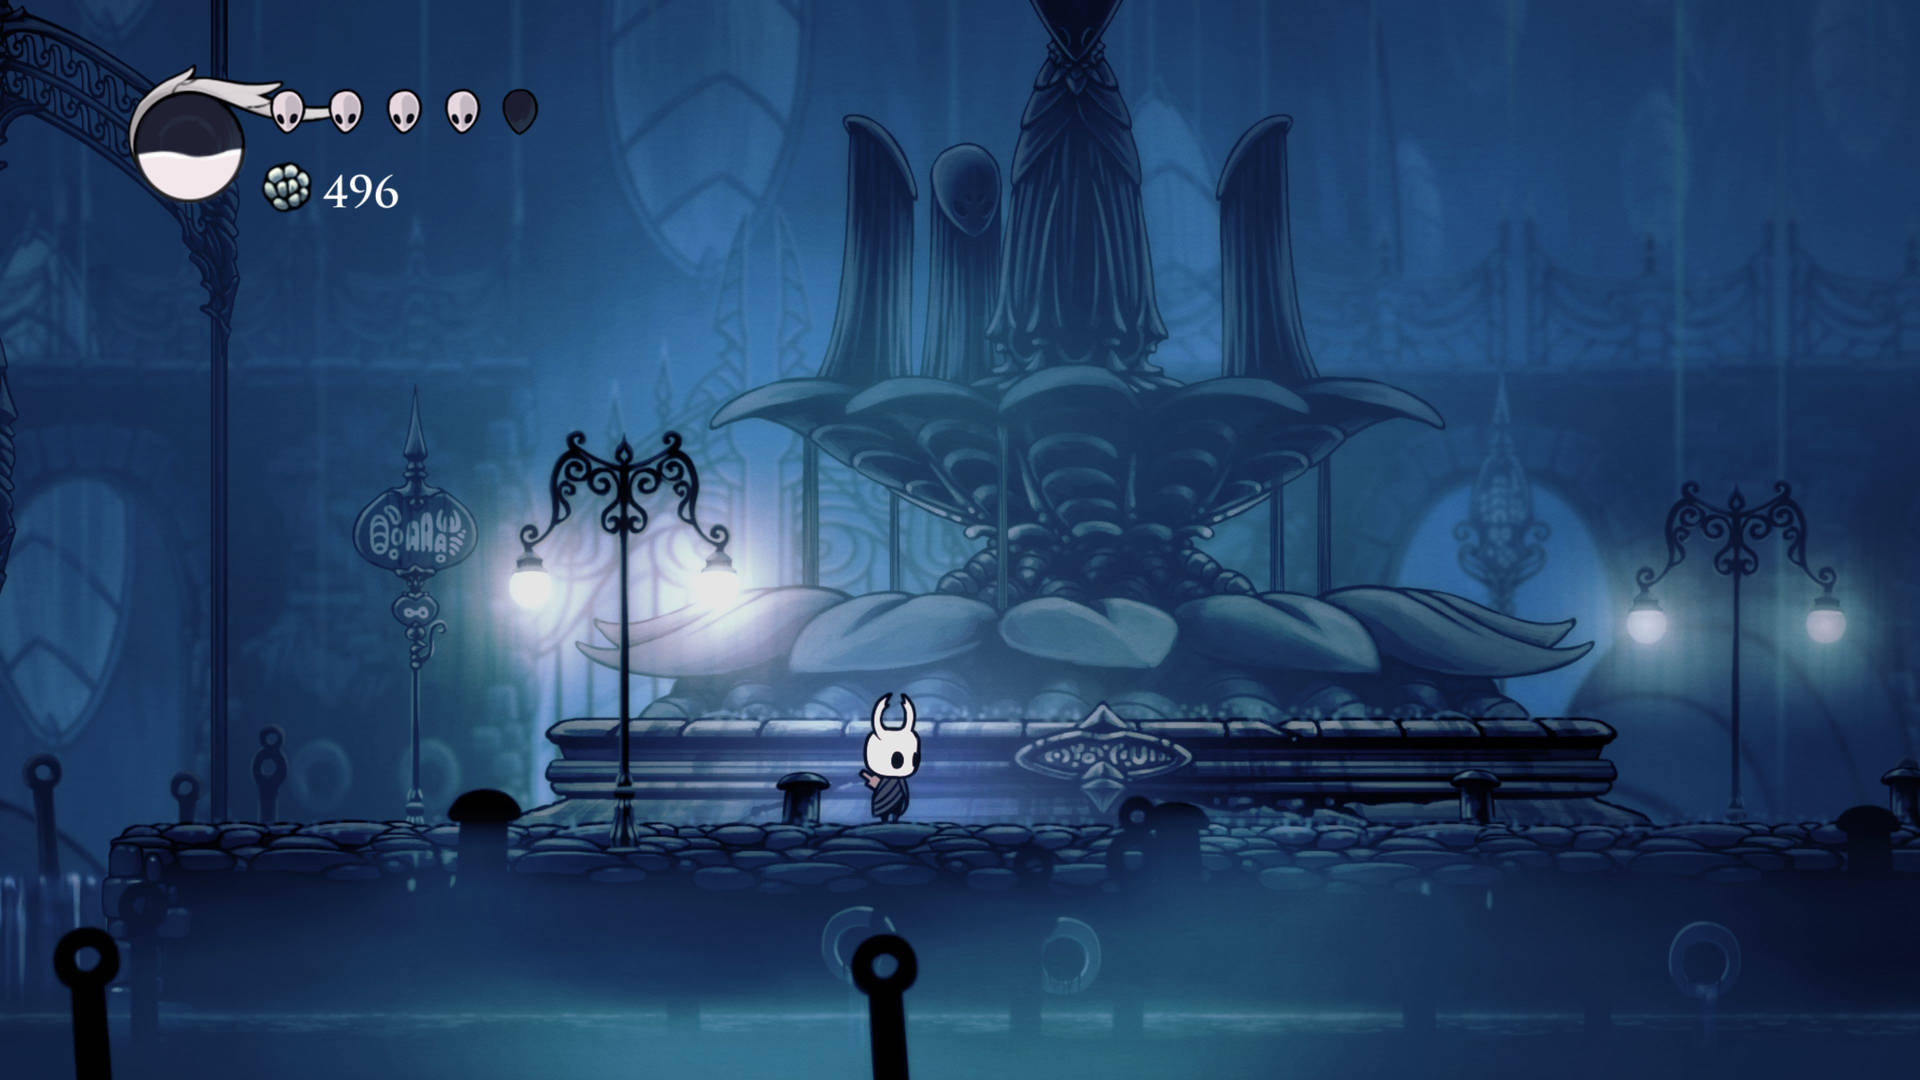 Embark on the Adventure of Hollow Knight Wallpaper